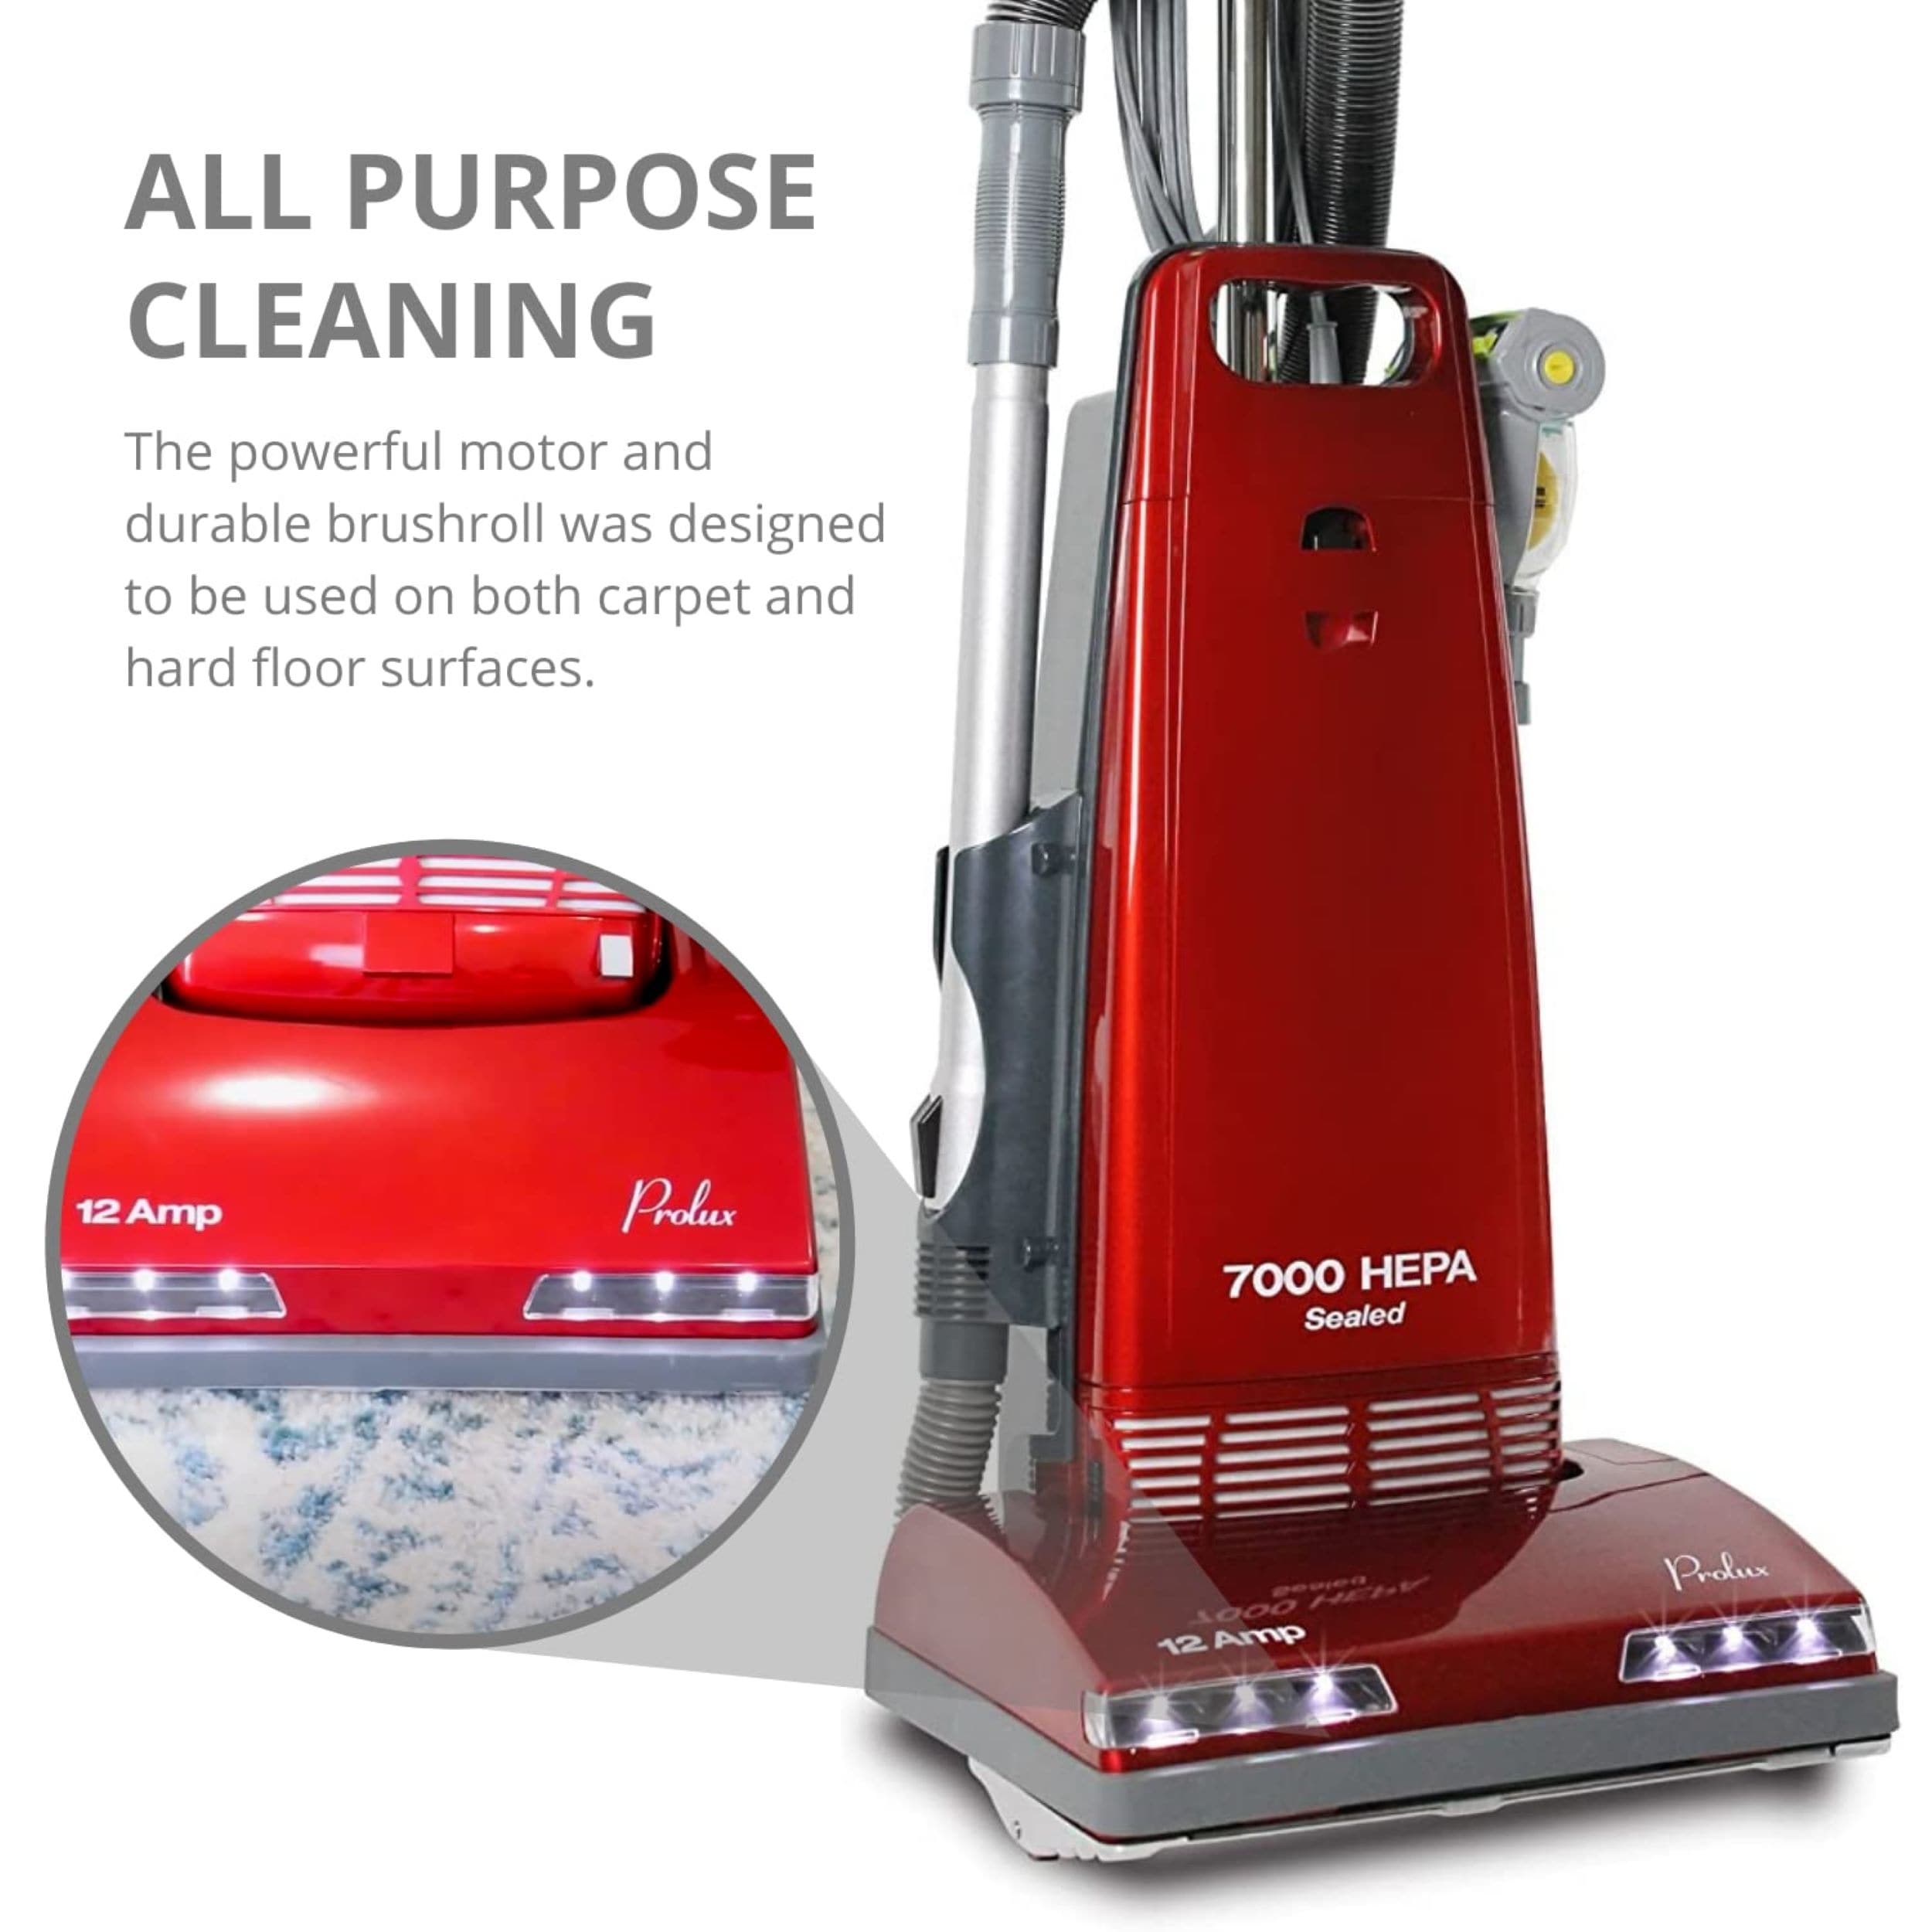 Prolux TerraVac Quiet Speed Canister Vacuum Cleaner with HEPA Filtration and Electric Powerhead - 3